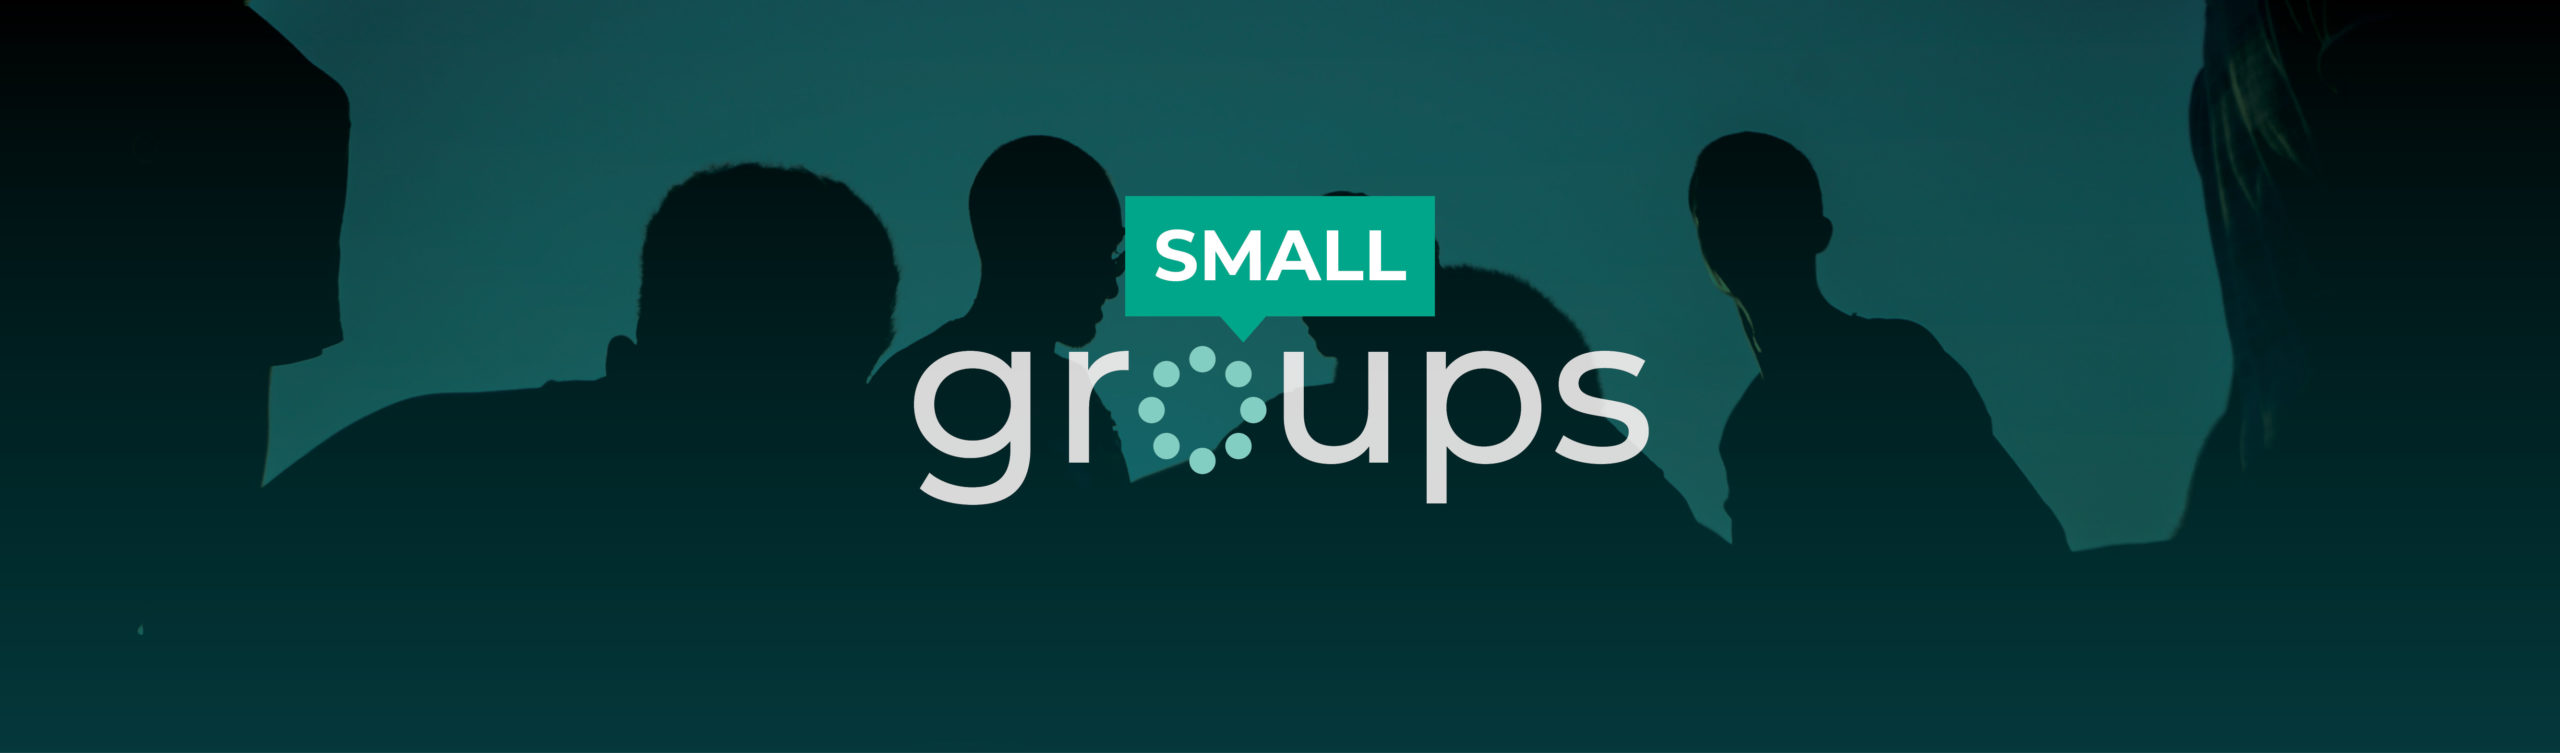 Small Groups_web